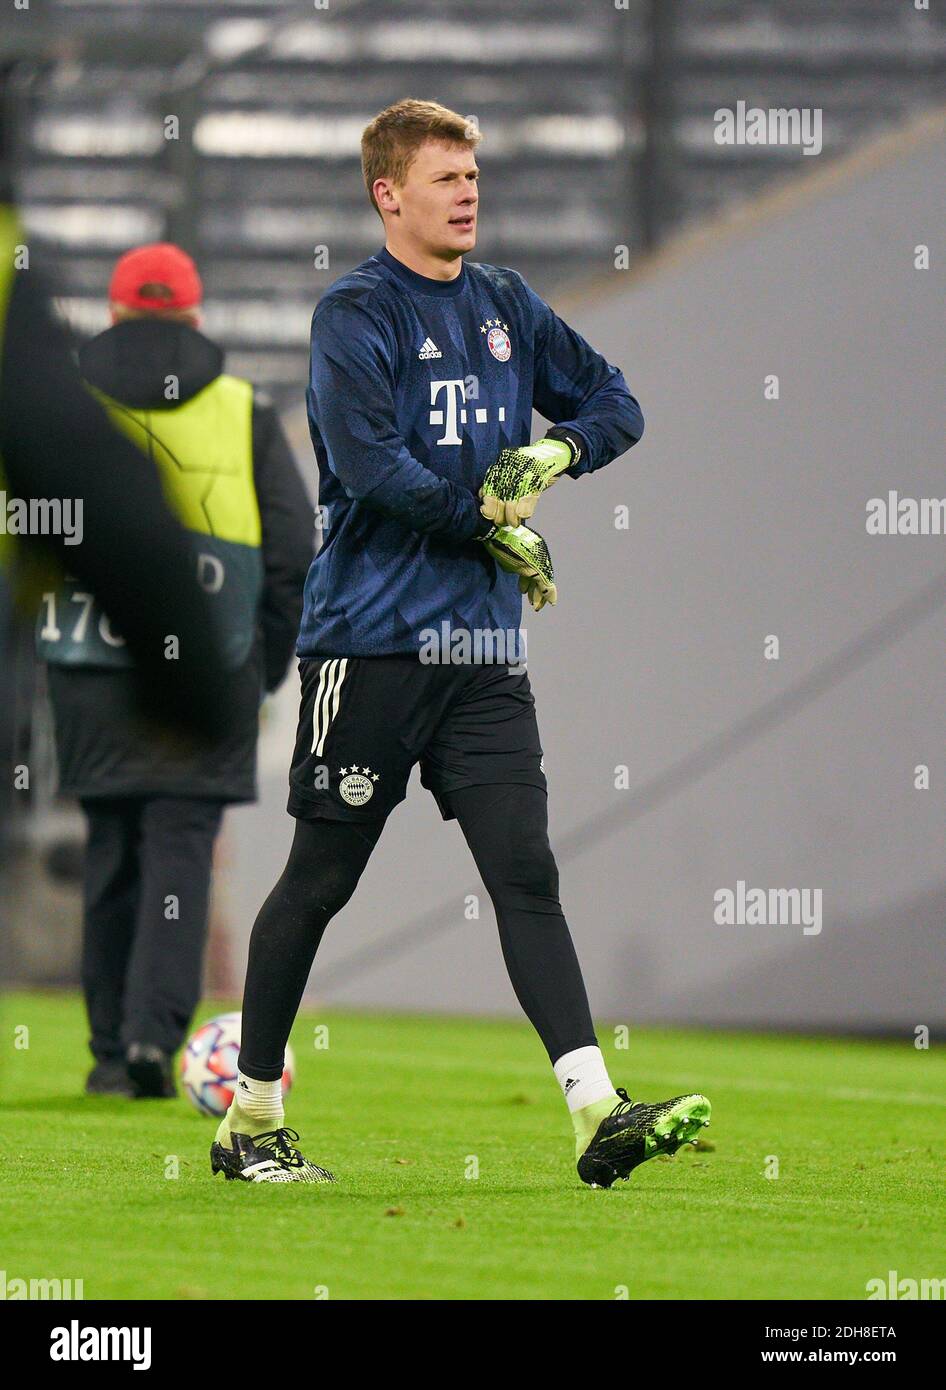 Alexander NUEBEL, goalkeeper FCB 35 Gymnastics, stretching, warming up, warm-up, preparation for the game,  in the match  FC BAYERN MUENCHEN - LOKOMOTIVE MOSKAU 2-0 of football UEFA Champions League group stage in season 2020/2021 in Munich, December 9, 2020.   © Peter Schatz / Alamy Live News Stock Photo